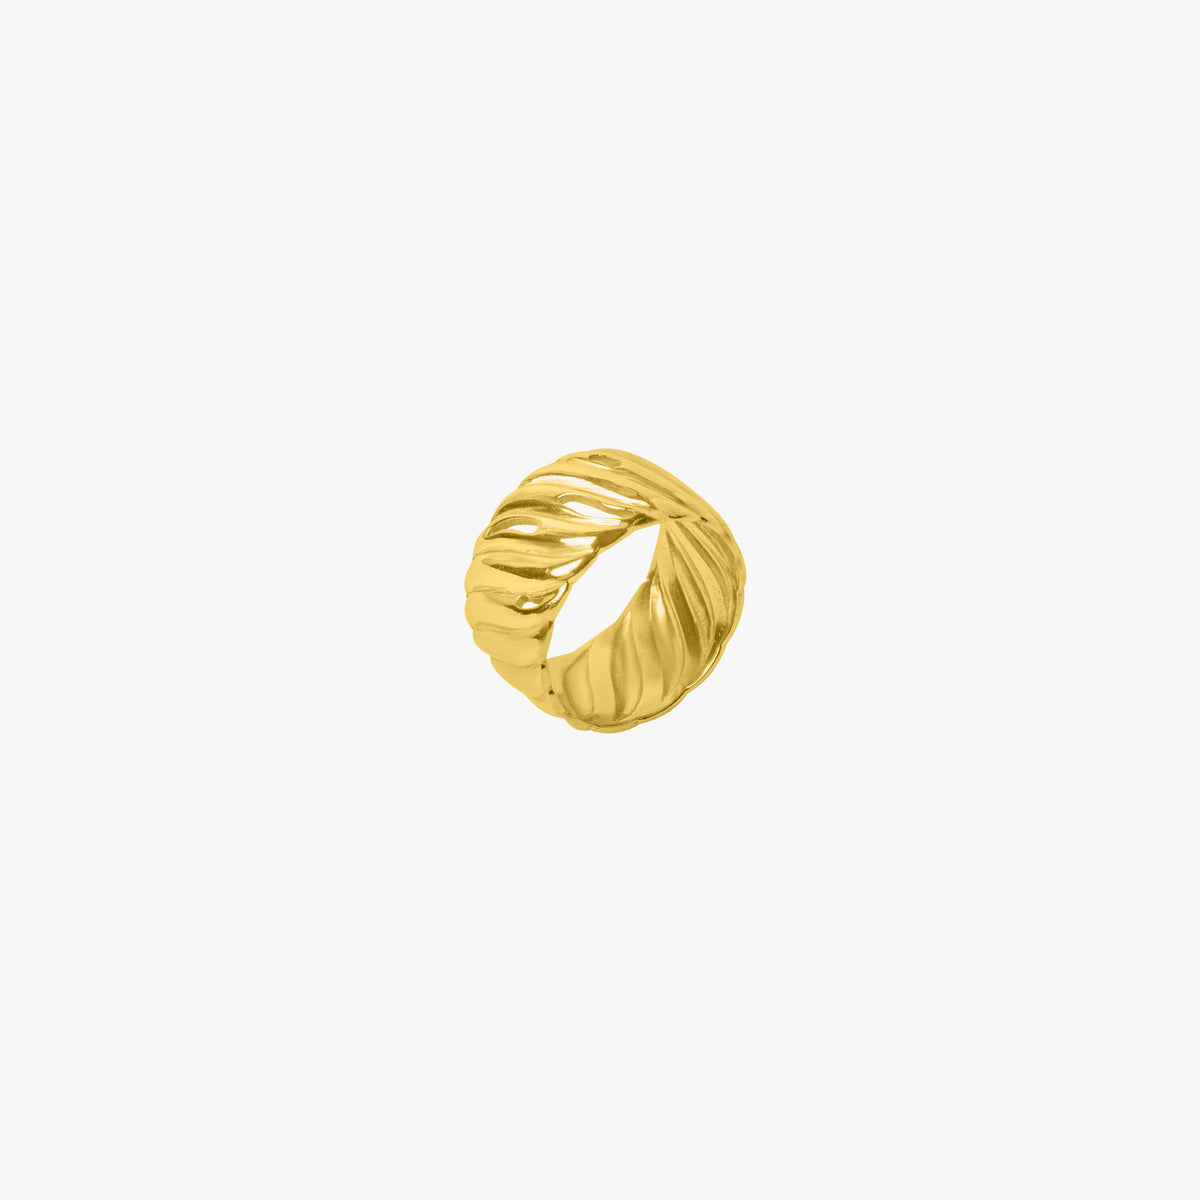 Sway Ring - Gold Tone